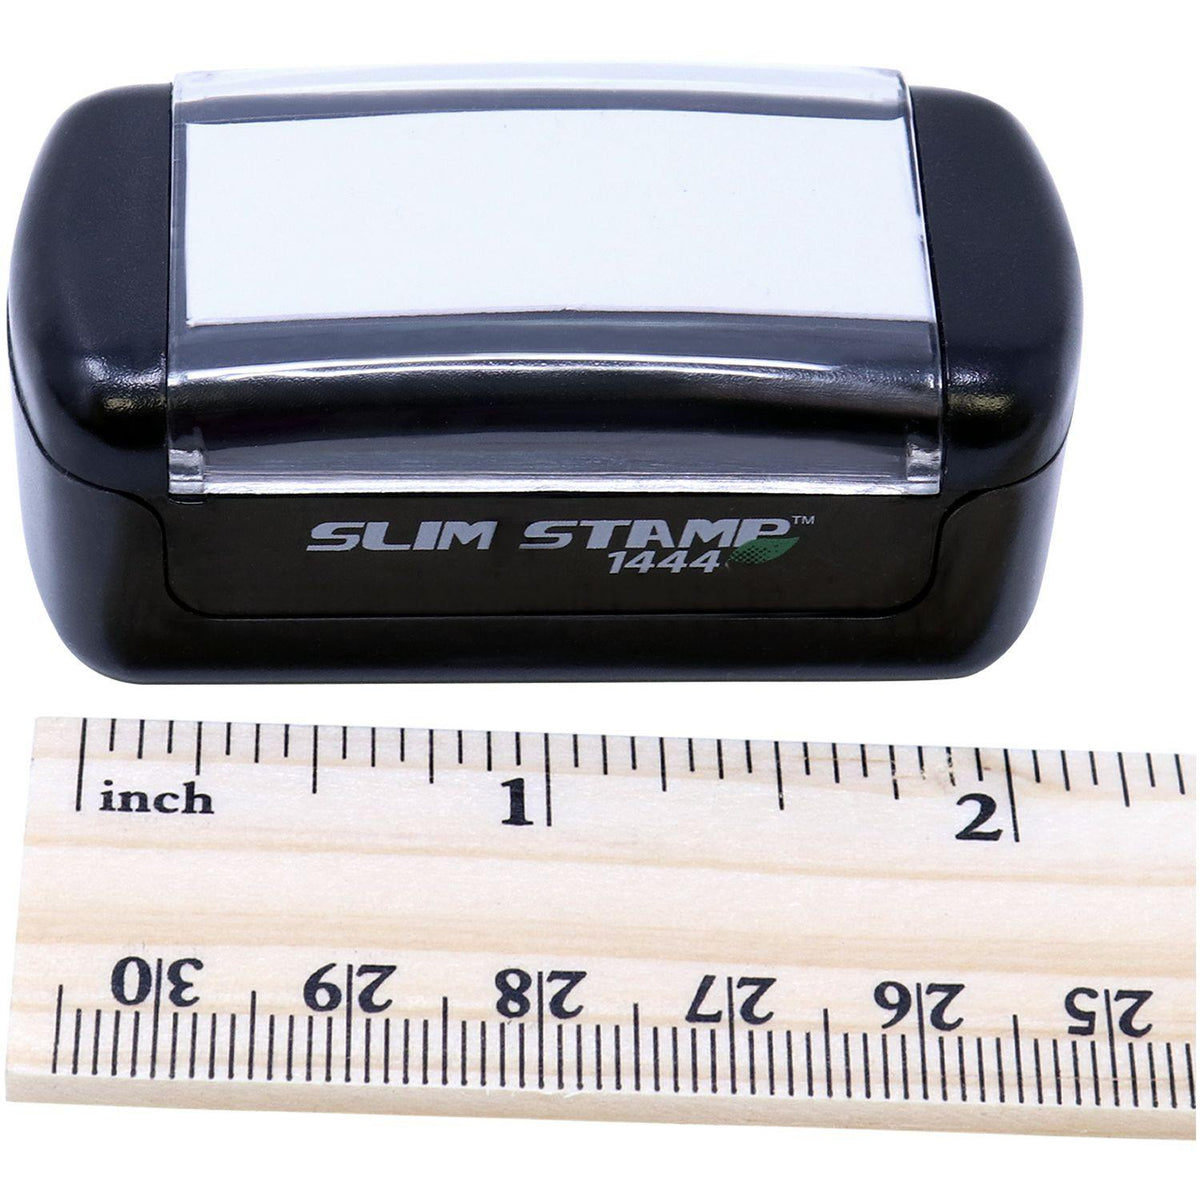 Measurement Slim Pre-Inked Credito Stamp with Ruler